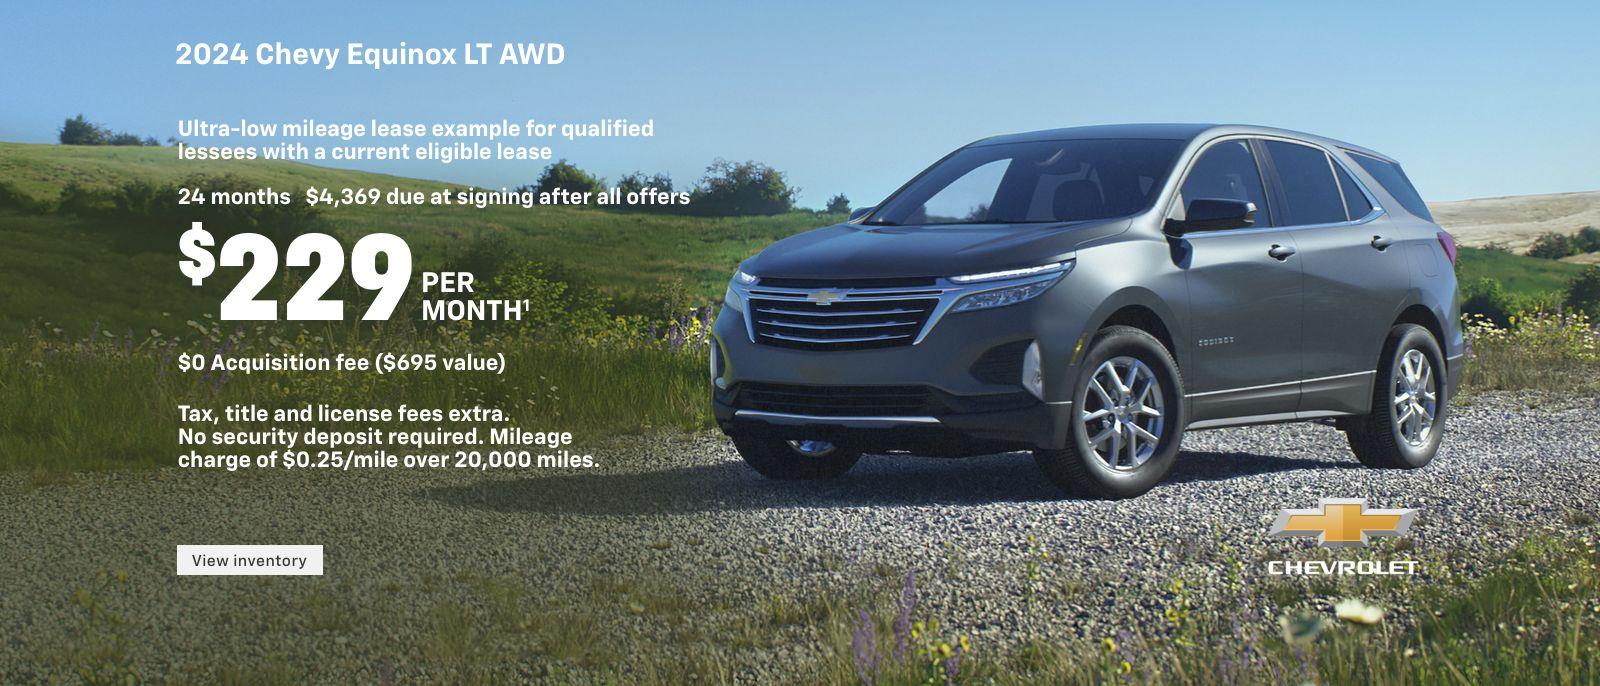 2024 Chevy Equinox LT AWD. Ultra-low mileage lease example for qualified lessees with a current eligible lease. $229 per month. 24 months. $4,369 due at signing after all offers. $0 Acquisition fee ($695 value). Tax, title and license fees extra. No security deposit required. Mileage charge of $0.25/mile over 20,000 miles.